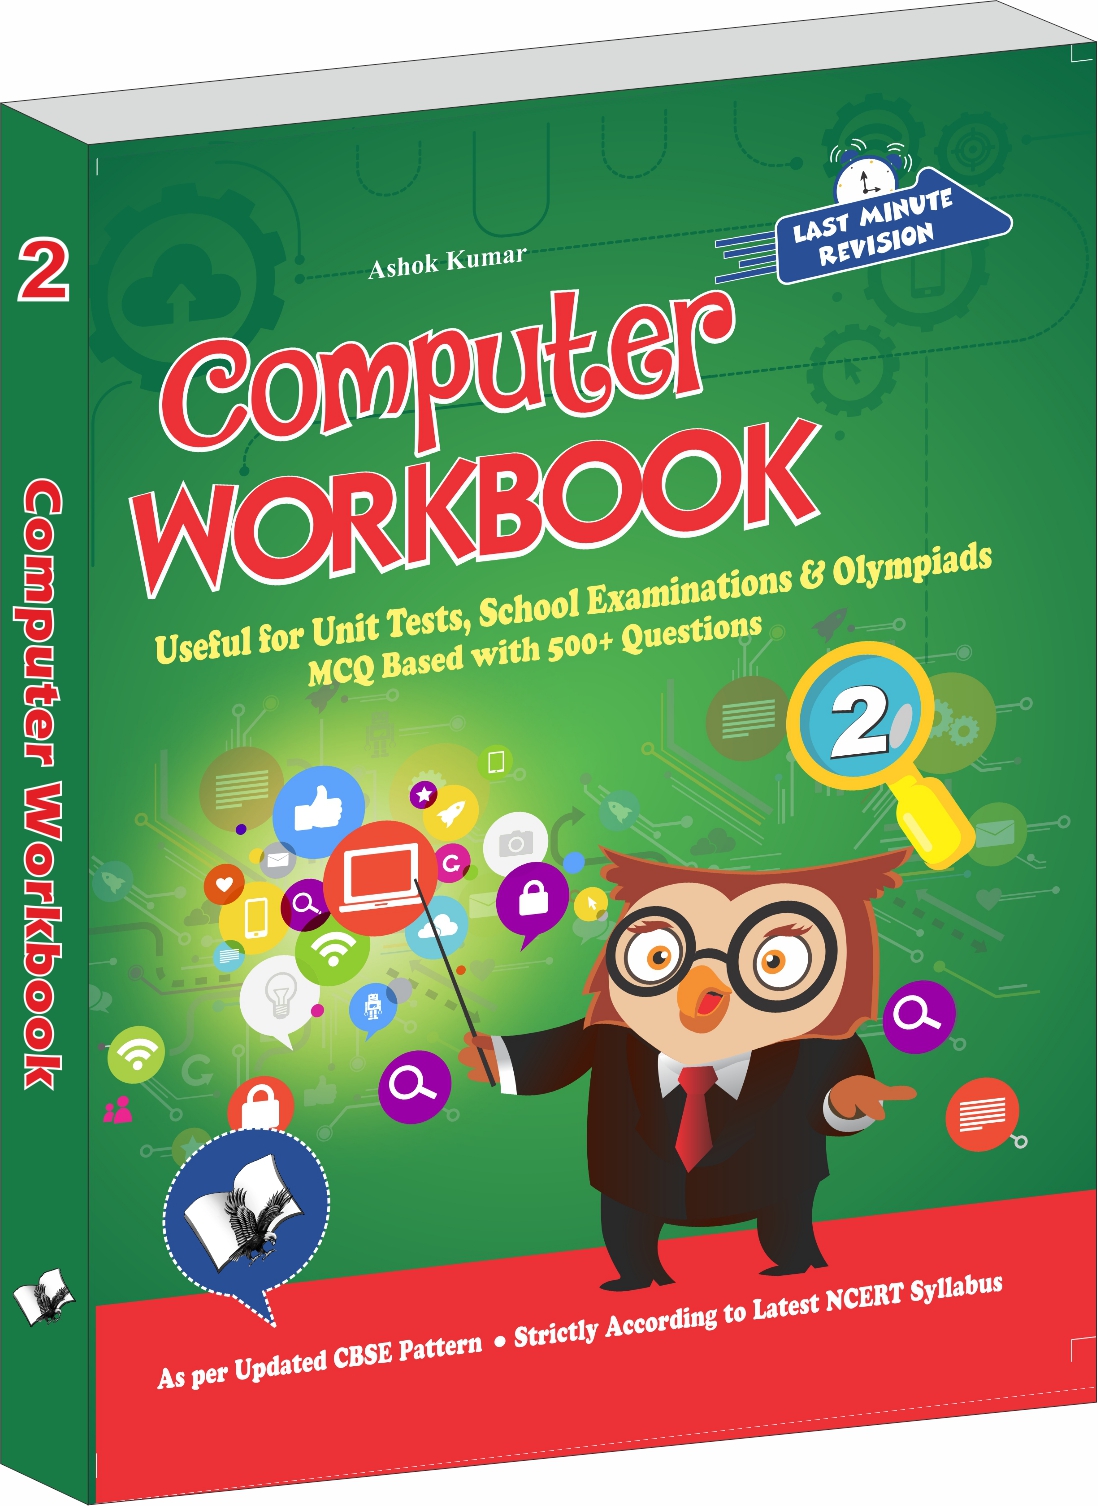 Computer Workbook Class 2-Useful for Unit Tests, School Examinations & Olympiads